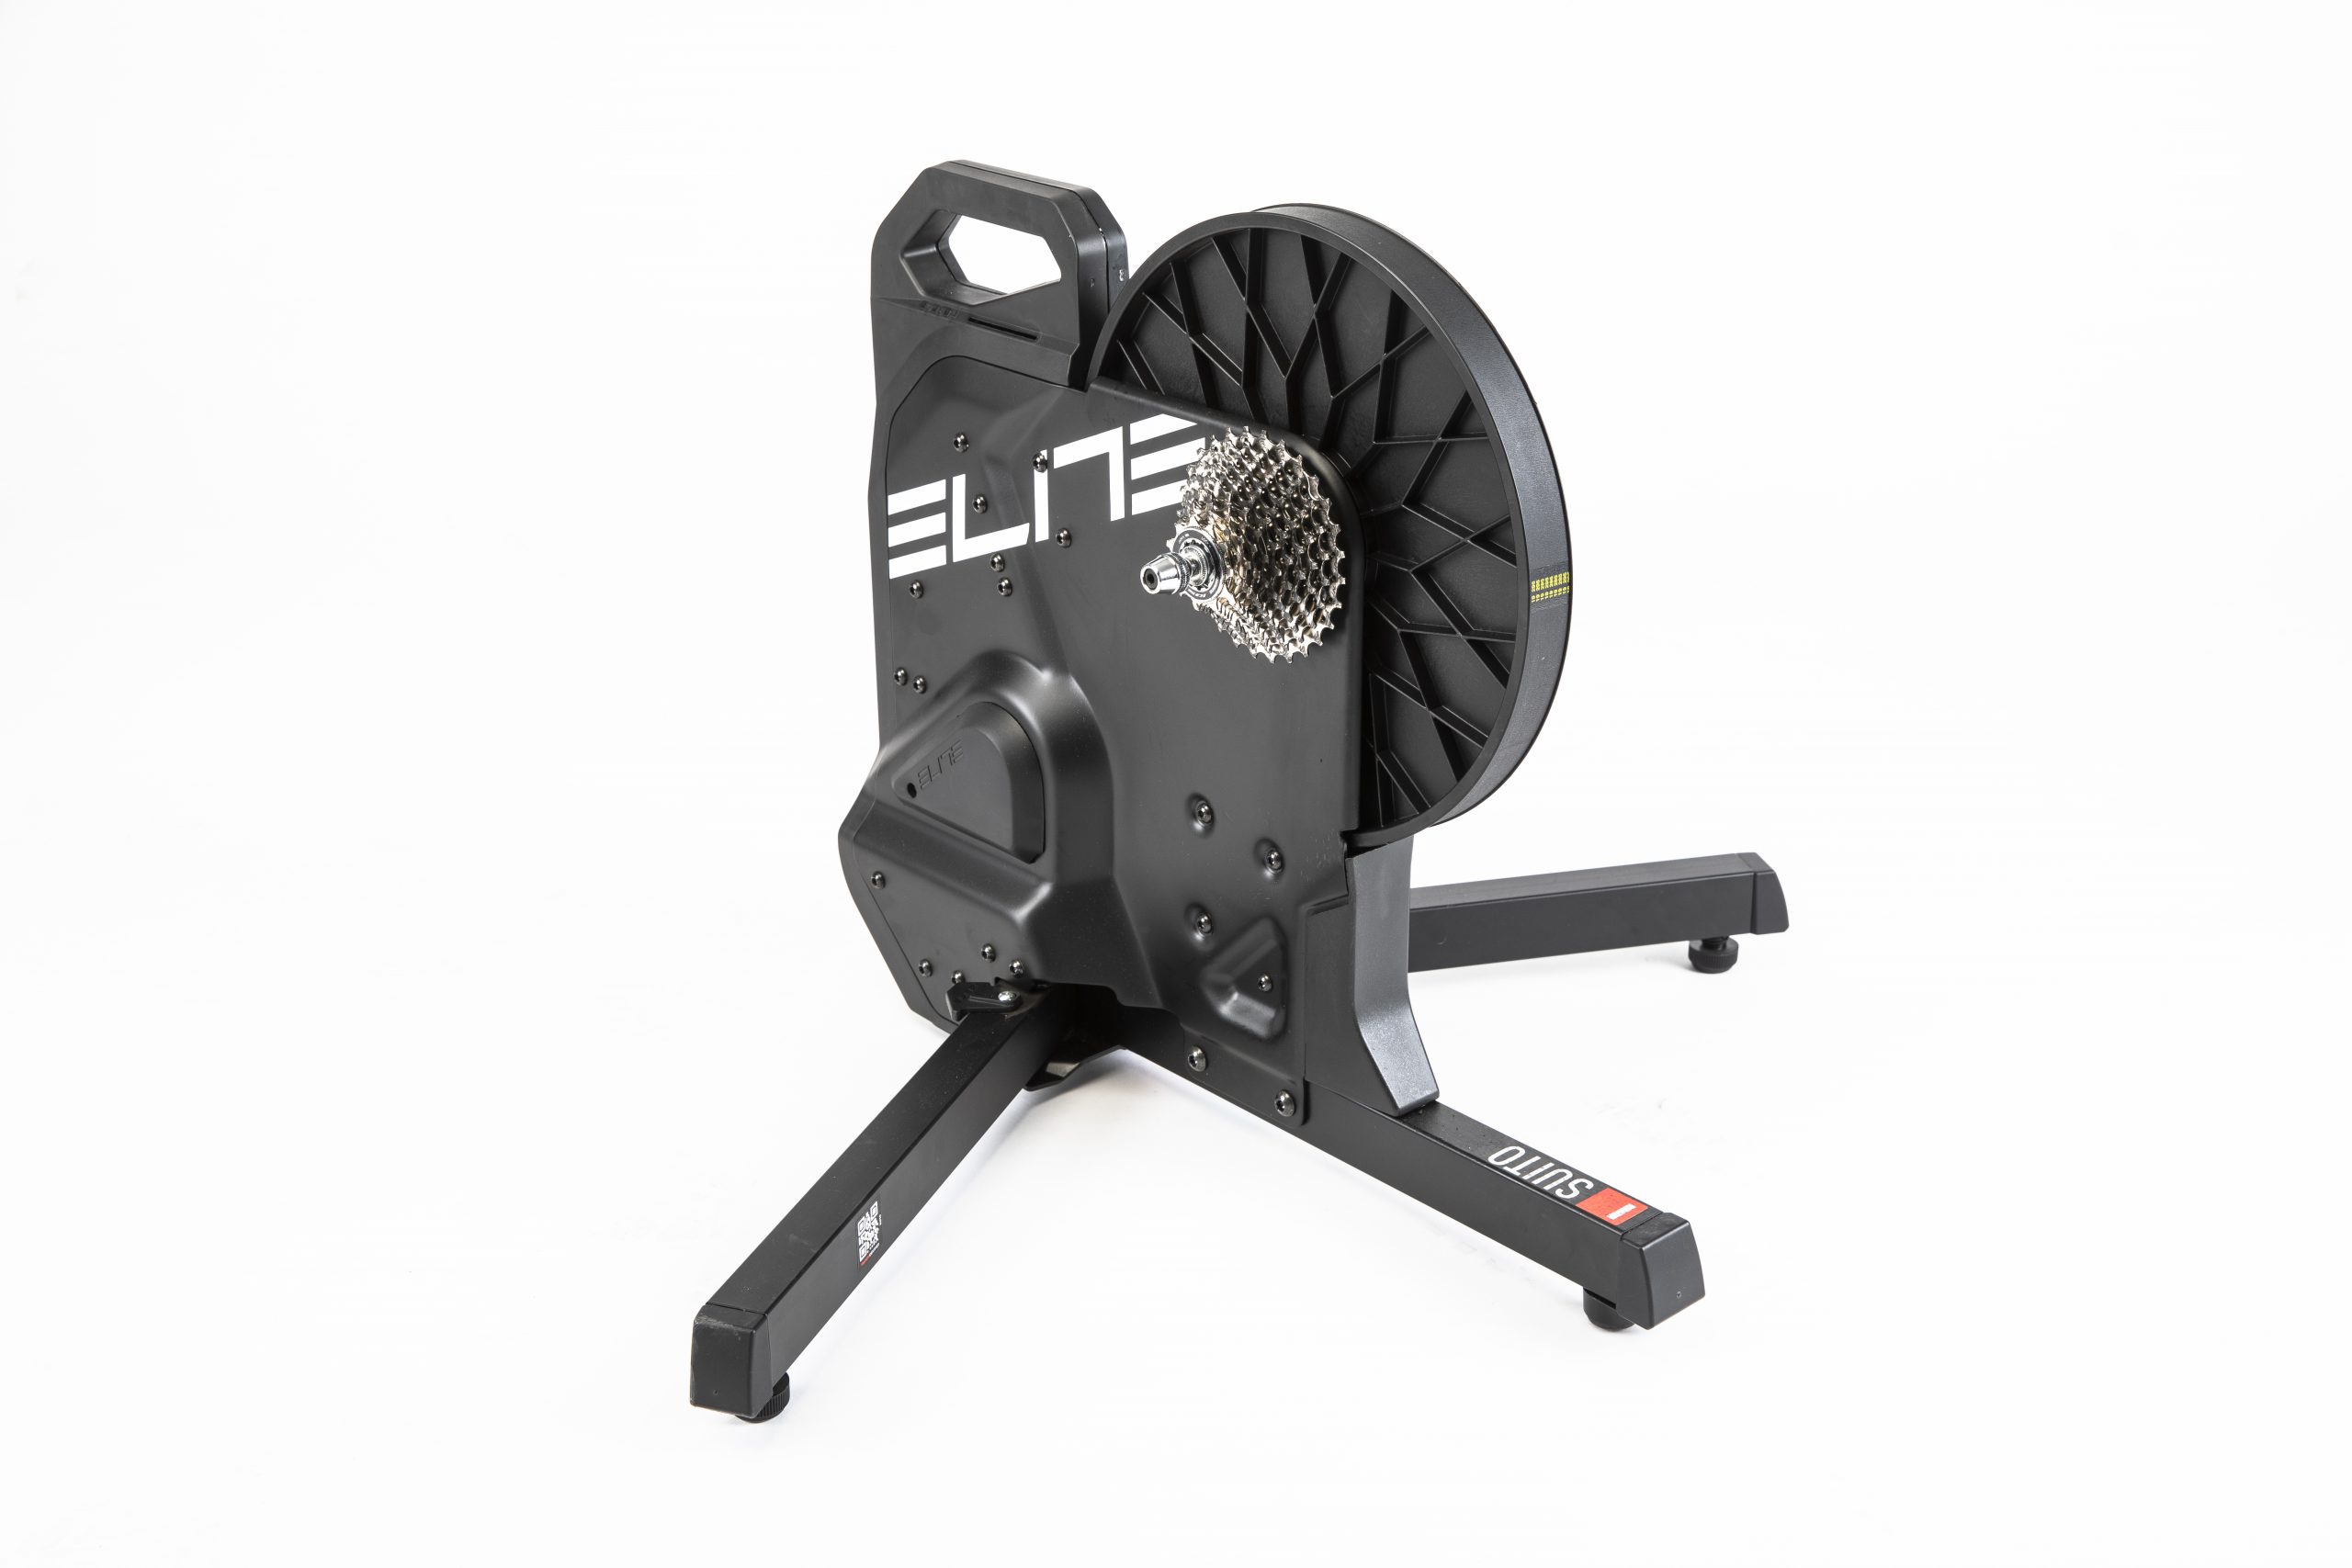 Elite Suito smart turbo trainer review | Cycling Weekly